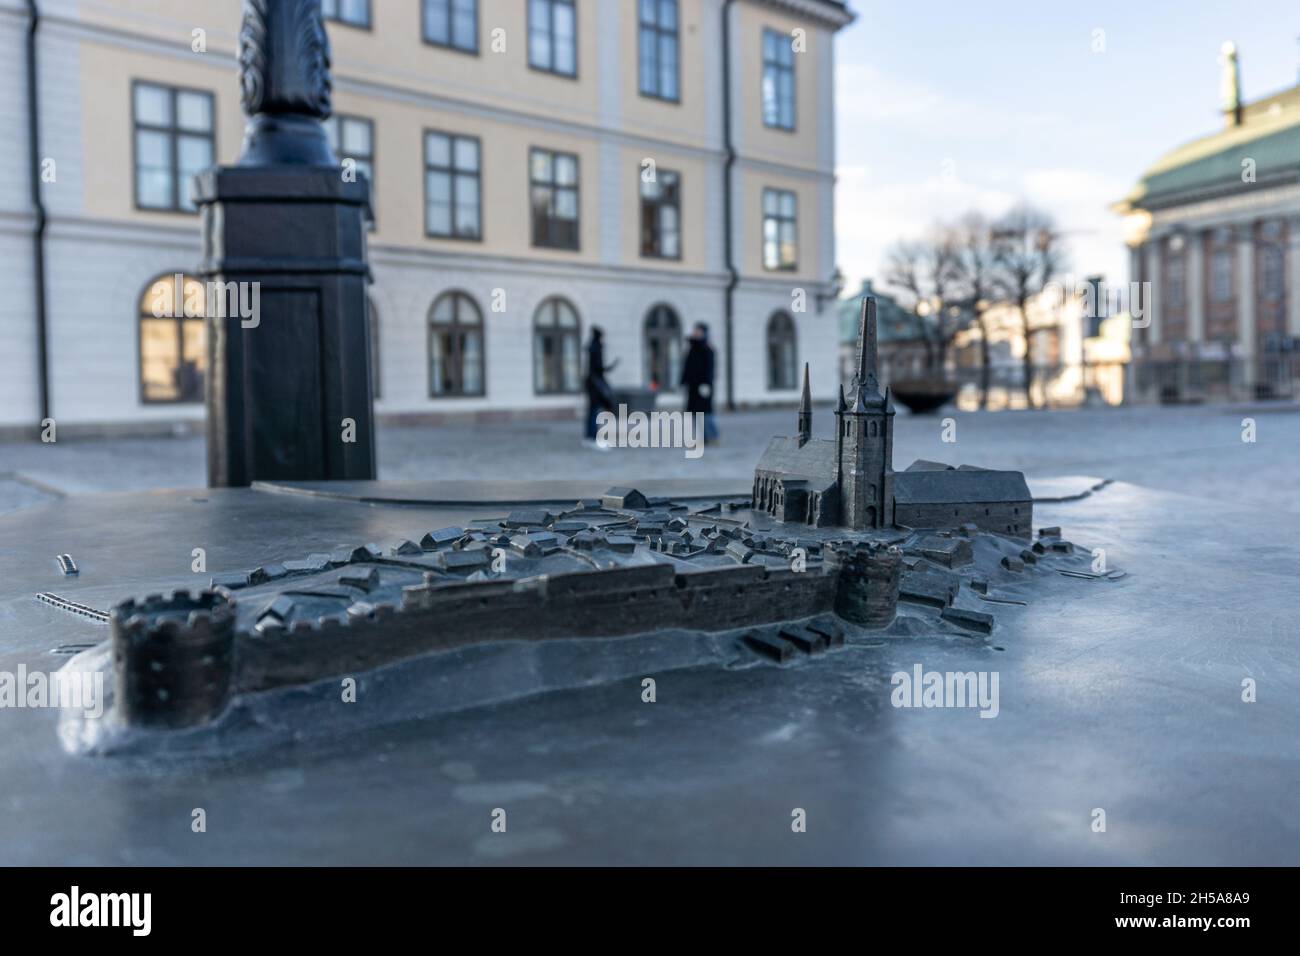 Stockholm, Sweden - April 5, 2021: View onto bronze plate with miniature model of building with blurred background with two people Stock Photo